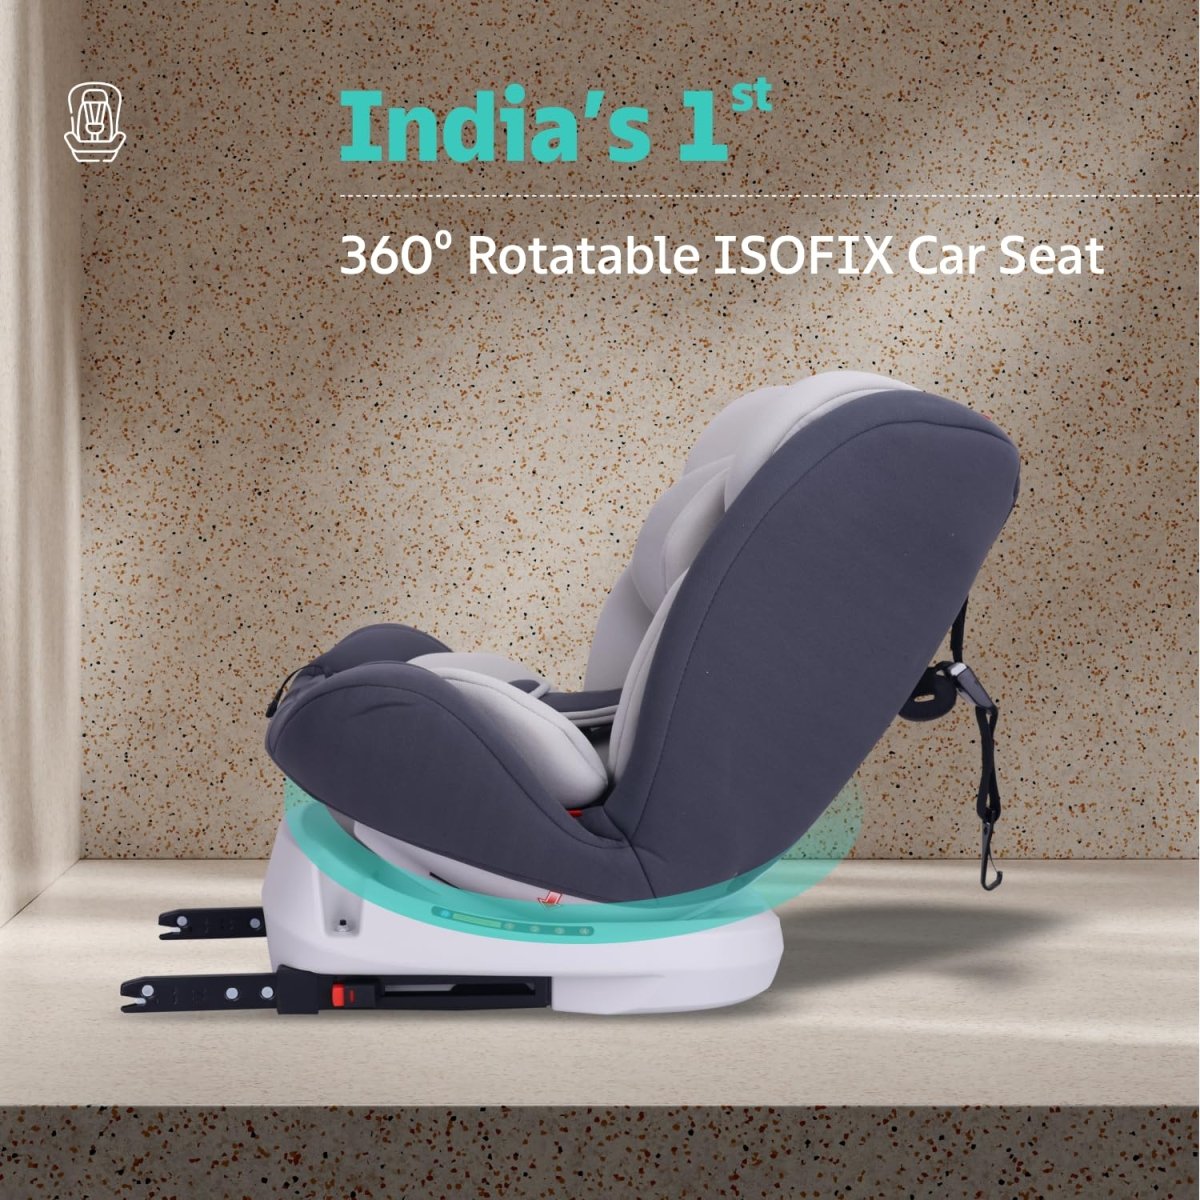 R for Rabbit Jack N Jill Grand ISOFIX Convertible Baby Car Seat for Kids- Grey - CCJJIG5